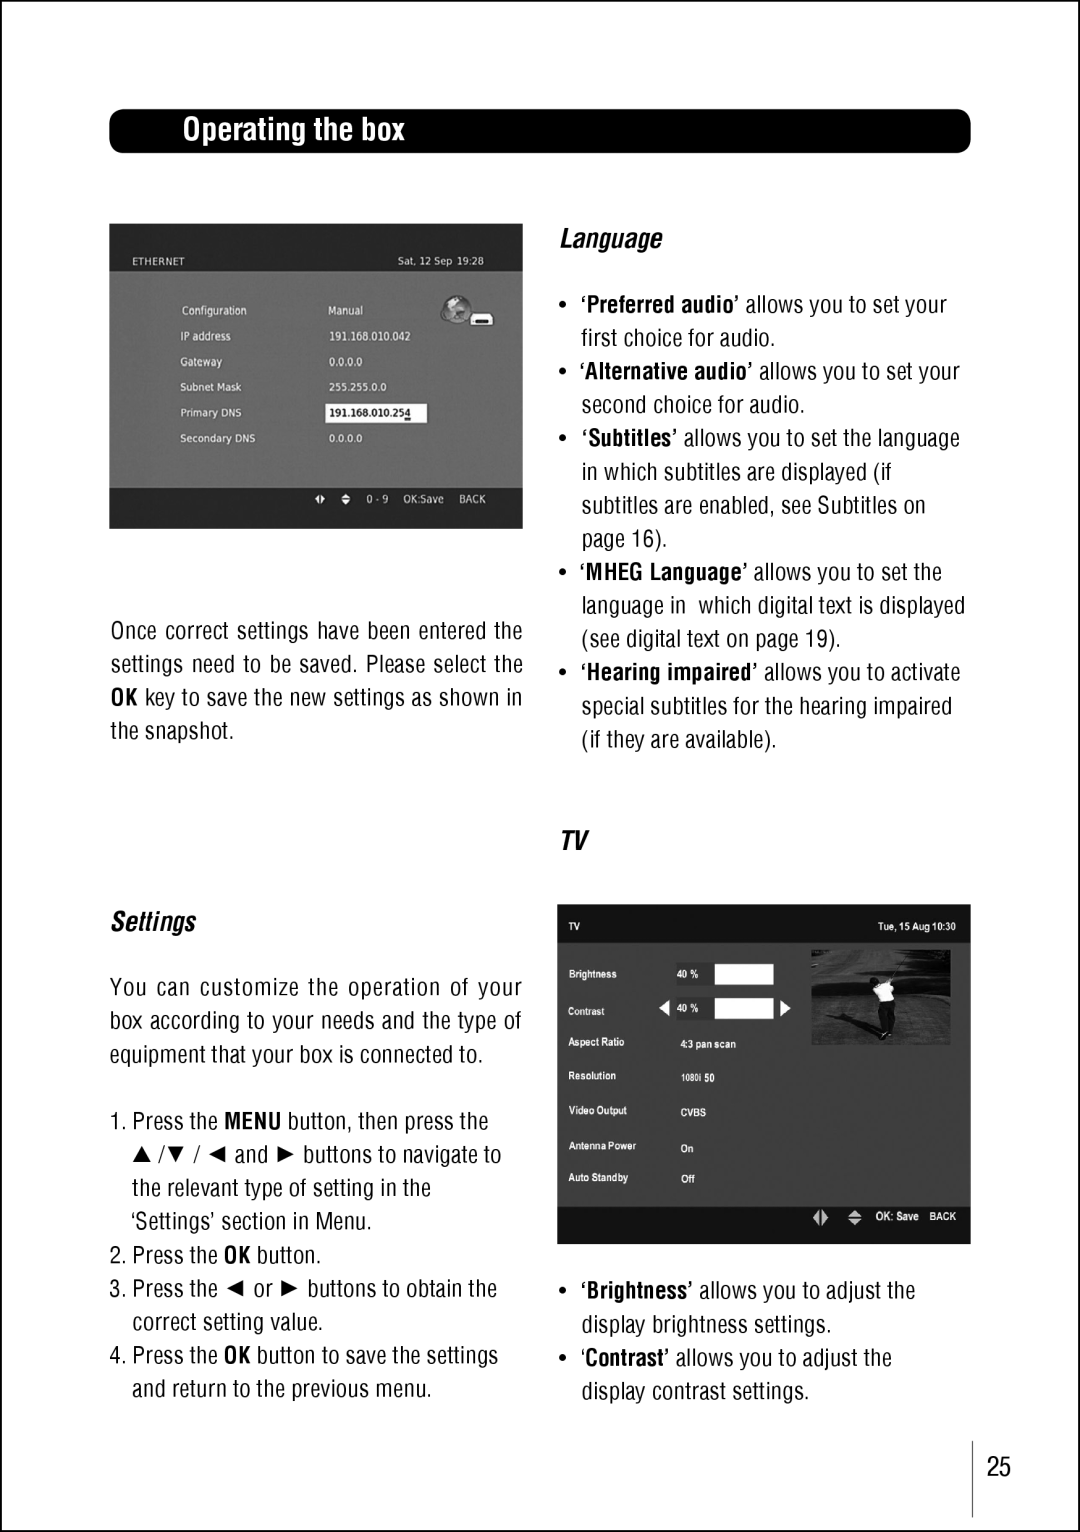 Technika STBHDIS2010 manual Language, Settings, ‘Preferred audio’ allows you to set your first choice for audio 